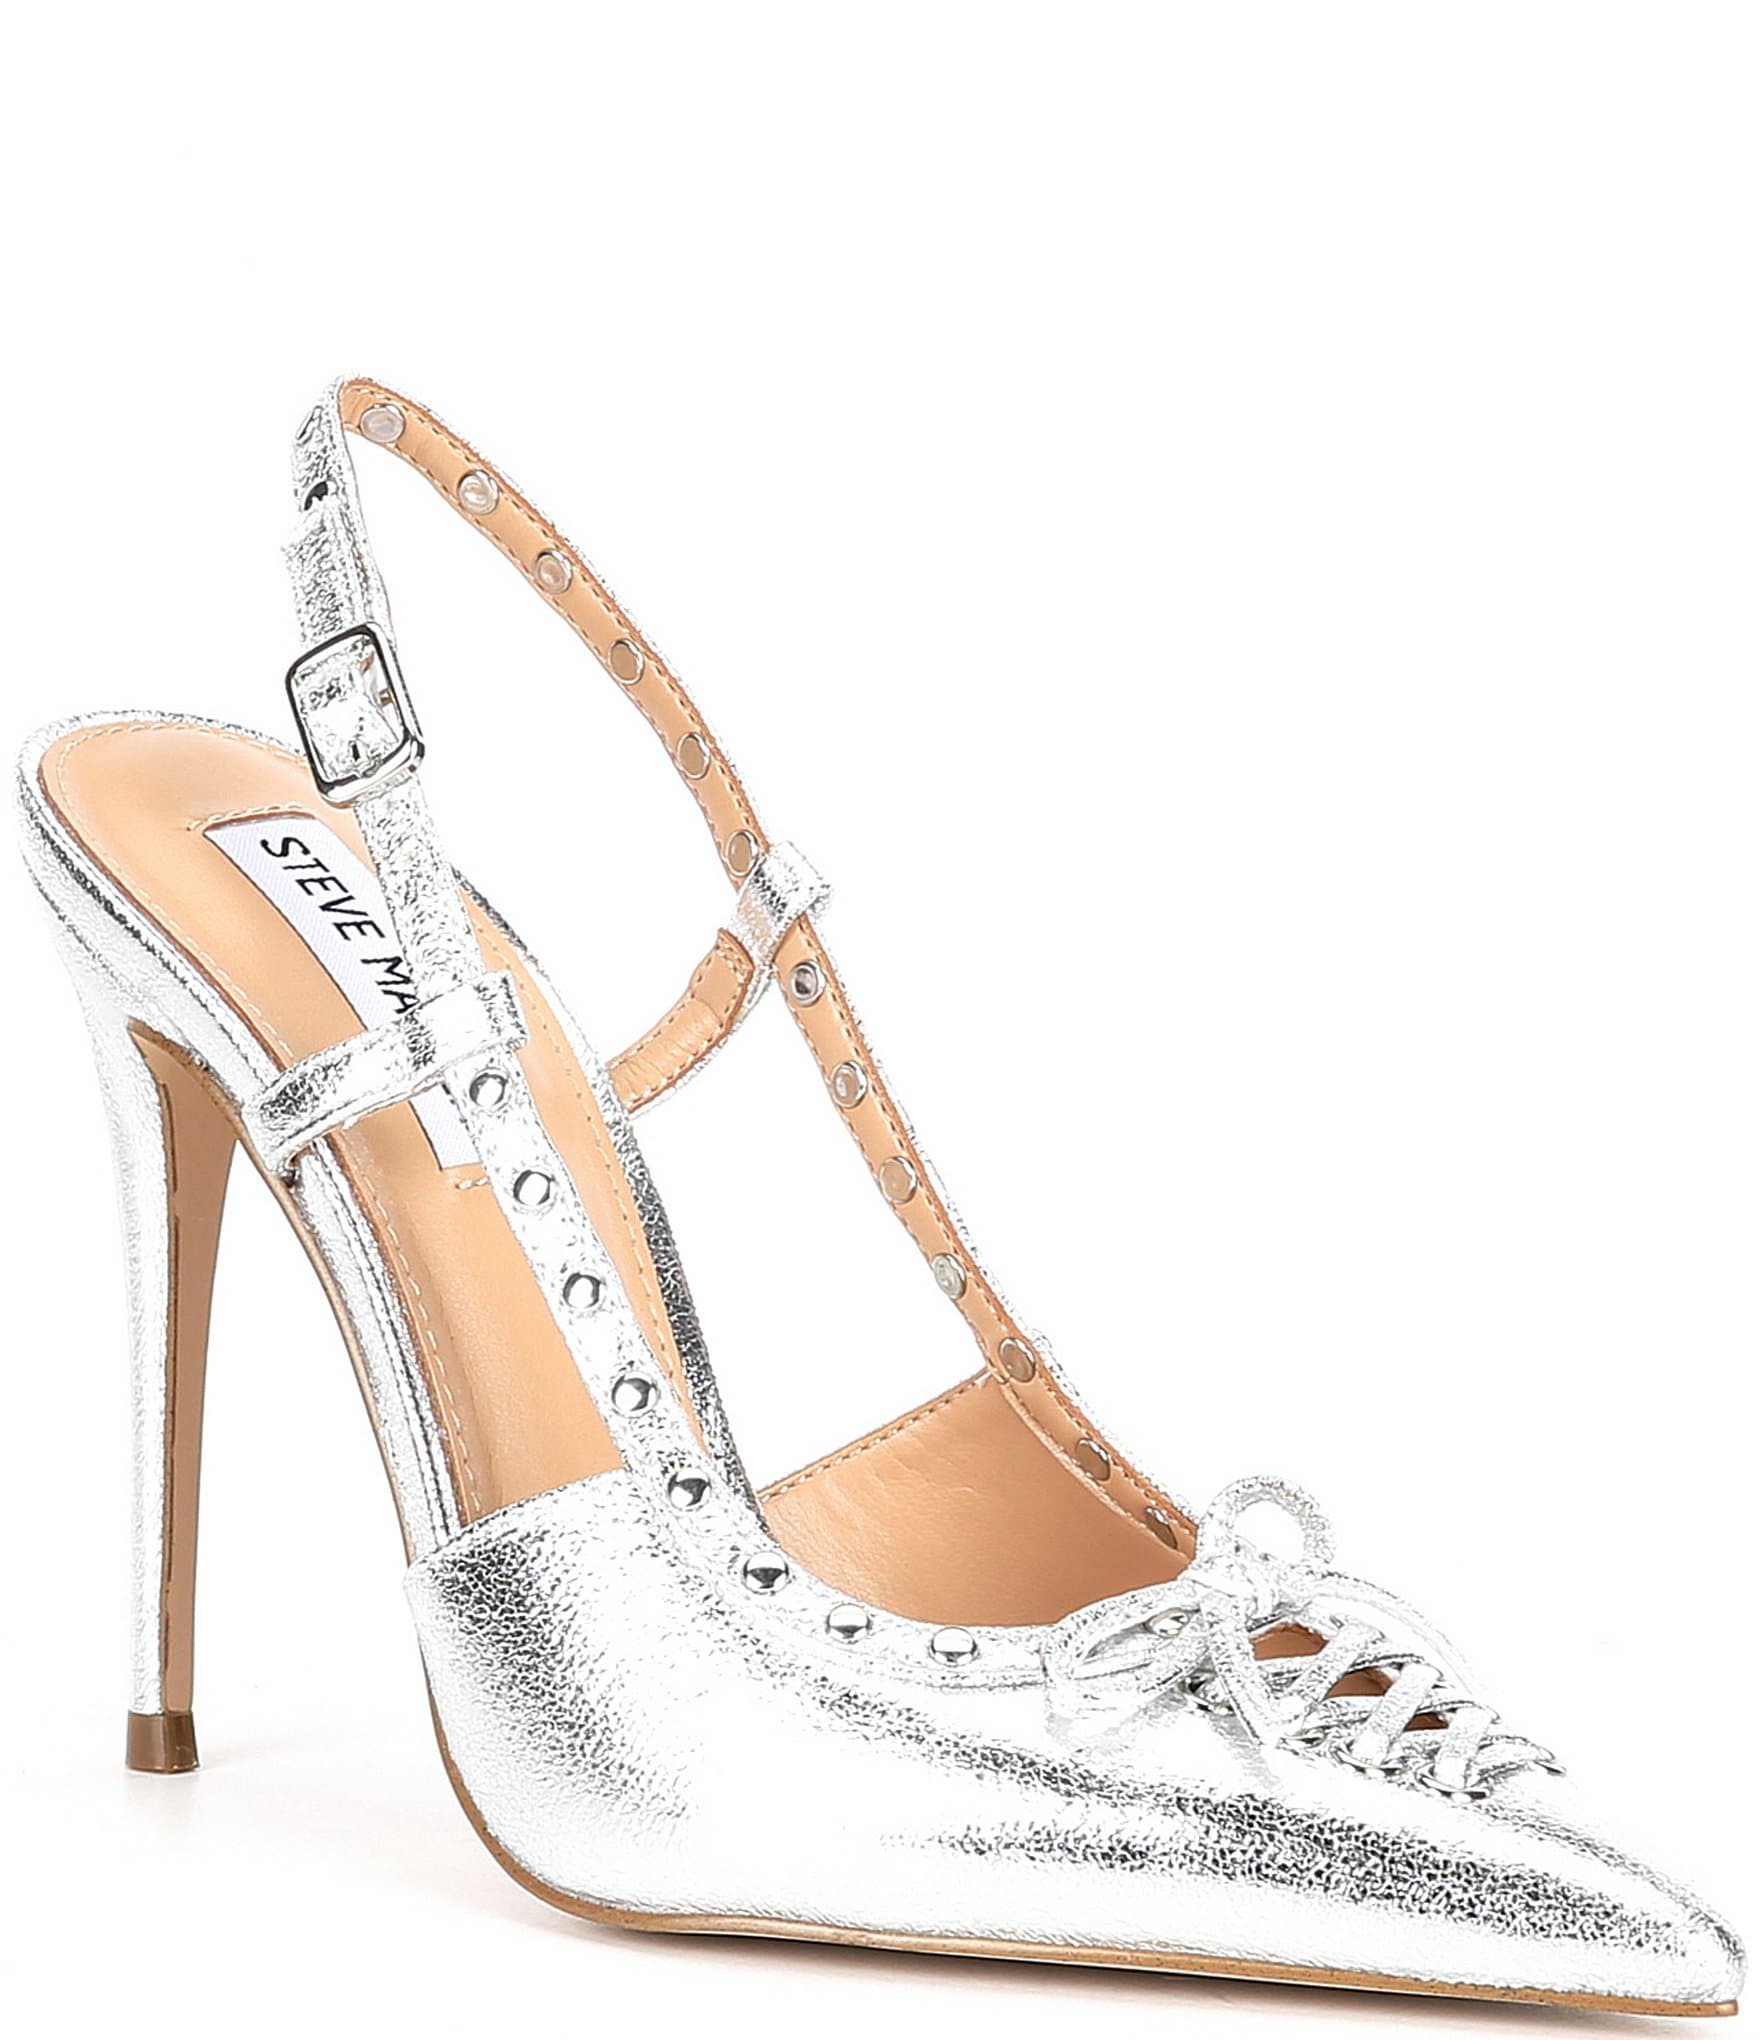 Shines in Louis Vuitton and Metallic Heels, RvceShops Revival